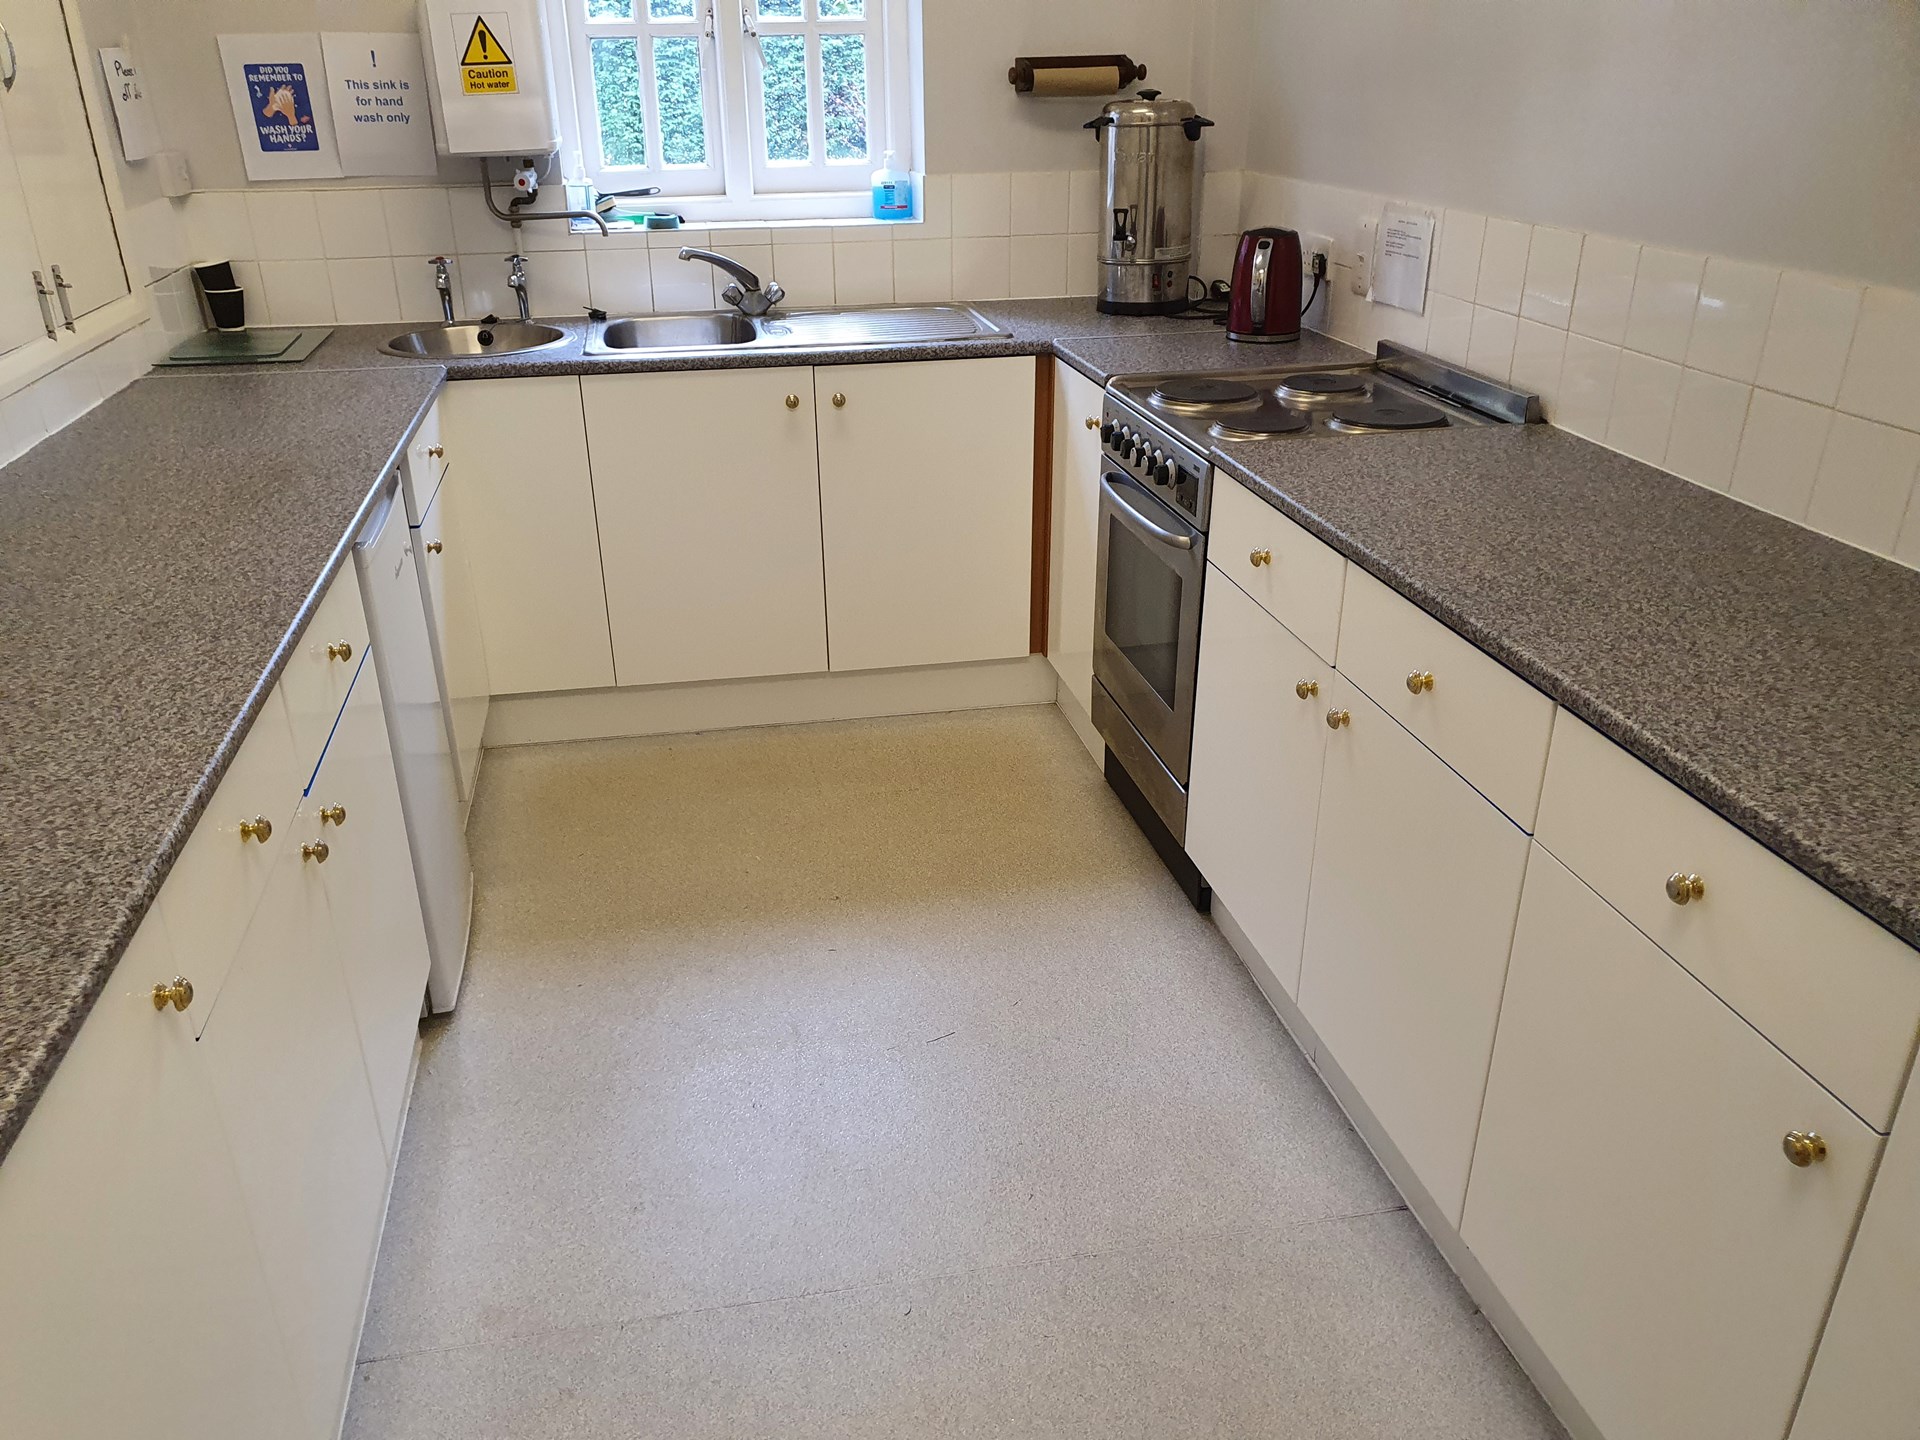 Our spacious kitchen, with cooker, fridge, Burco boiler and kettle